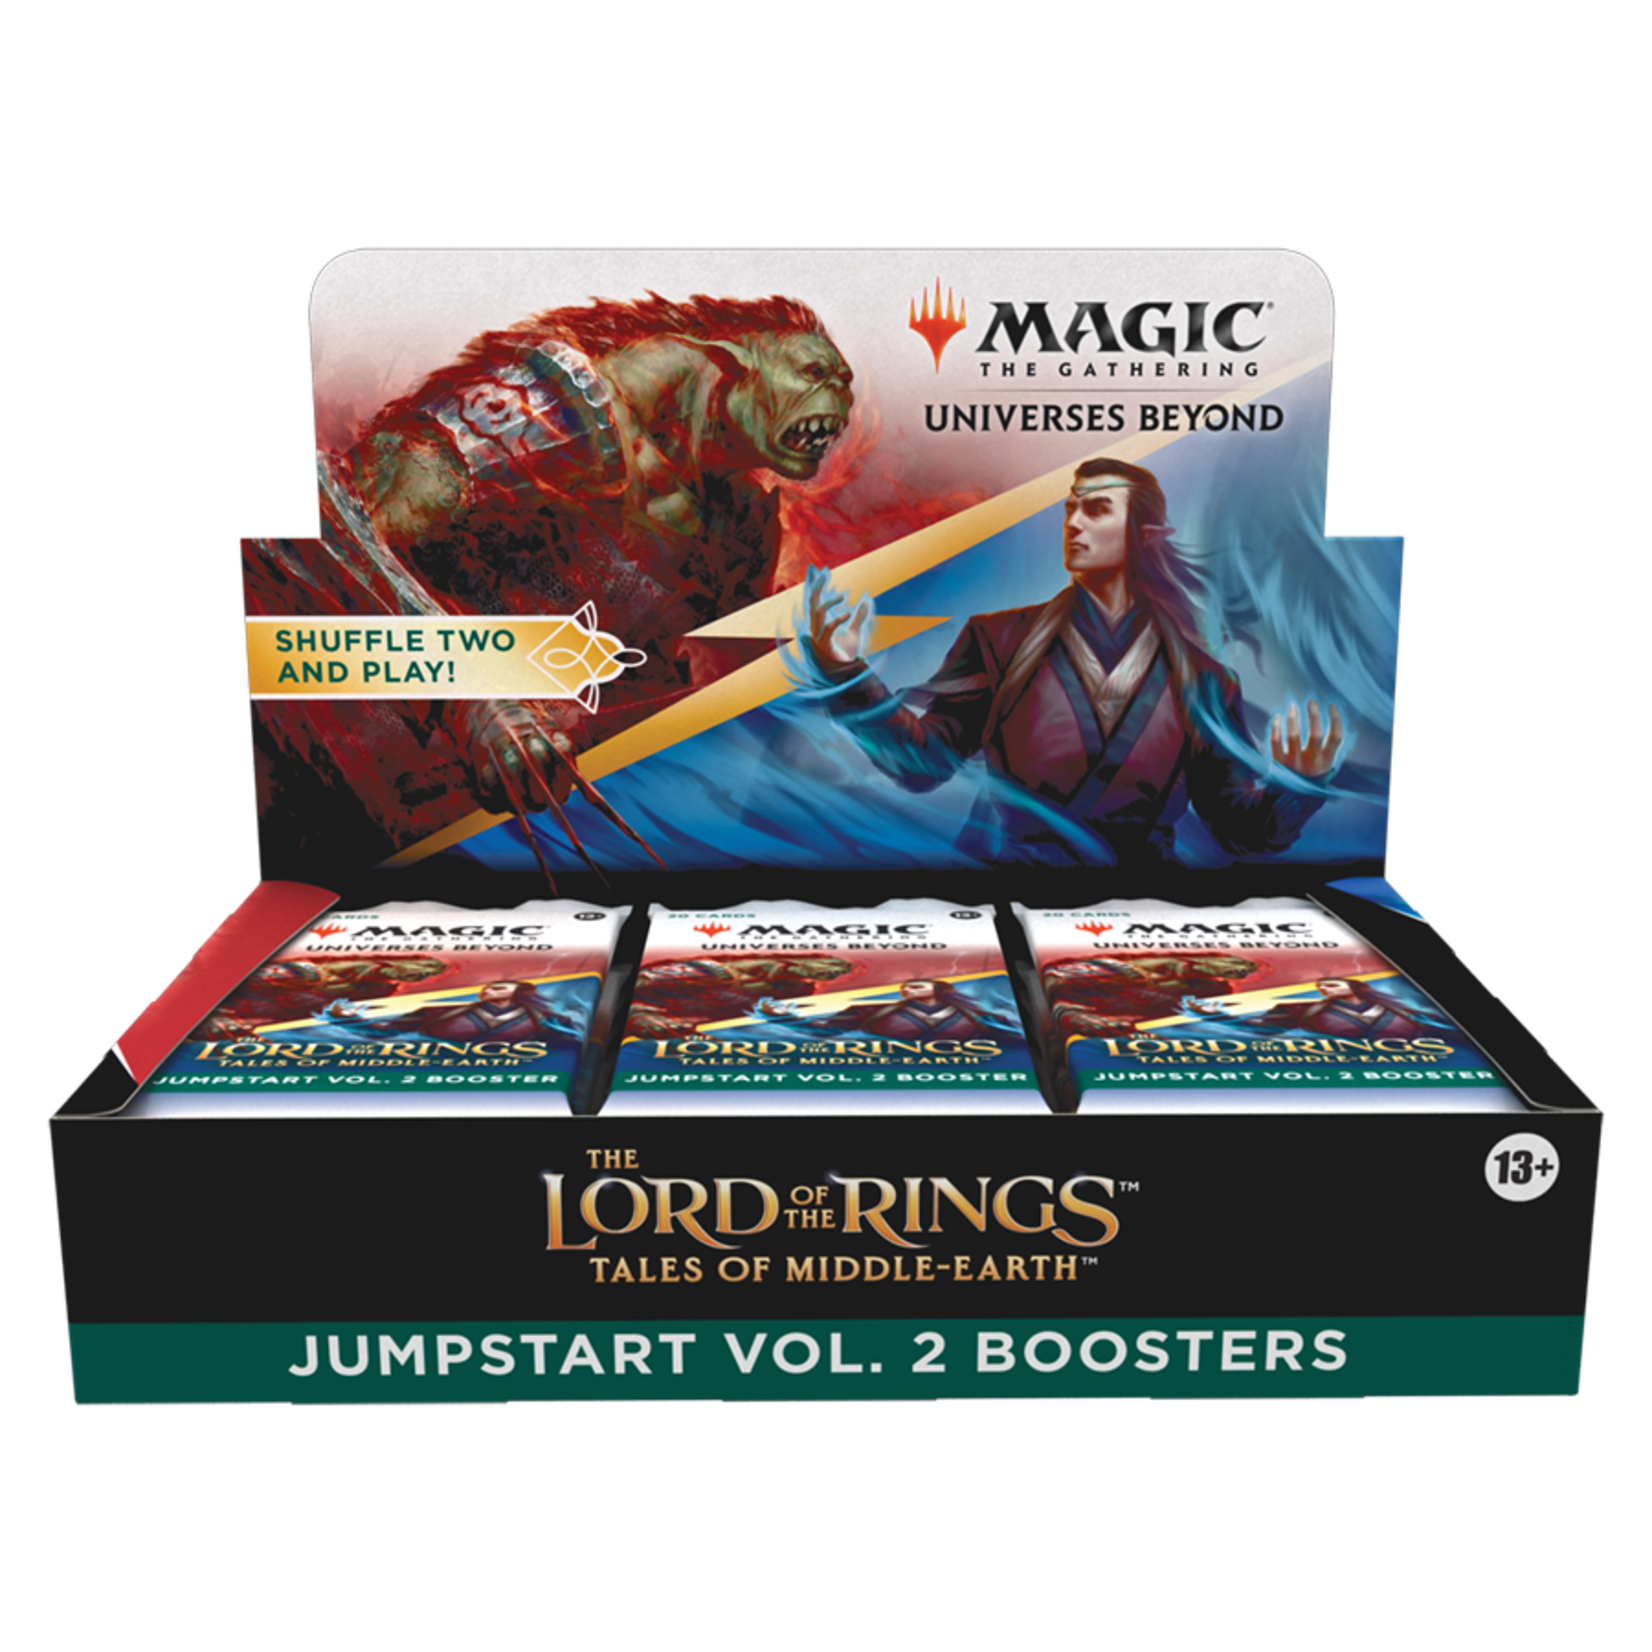 Magic: The Gathering The Lord of the Rings: Tales of Middle-earth Holiday Release, Jumpstart Vol. 2 Booster Box